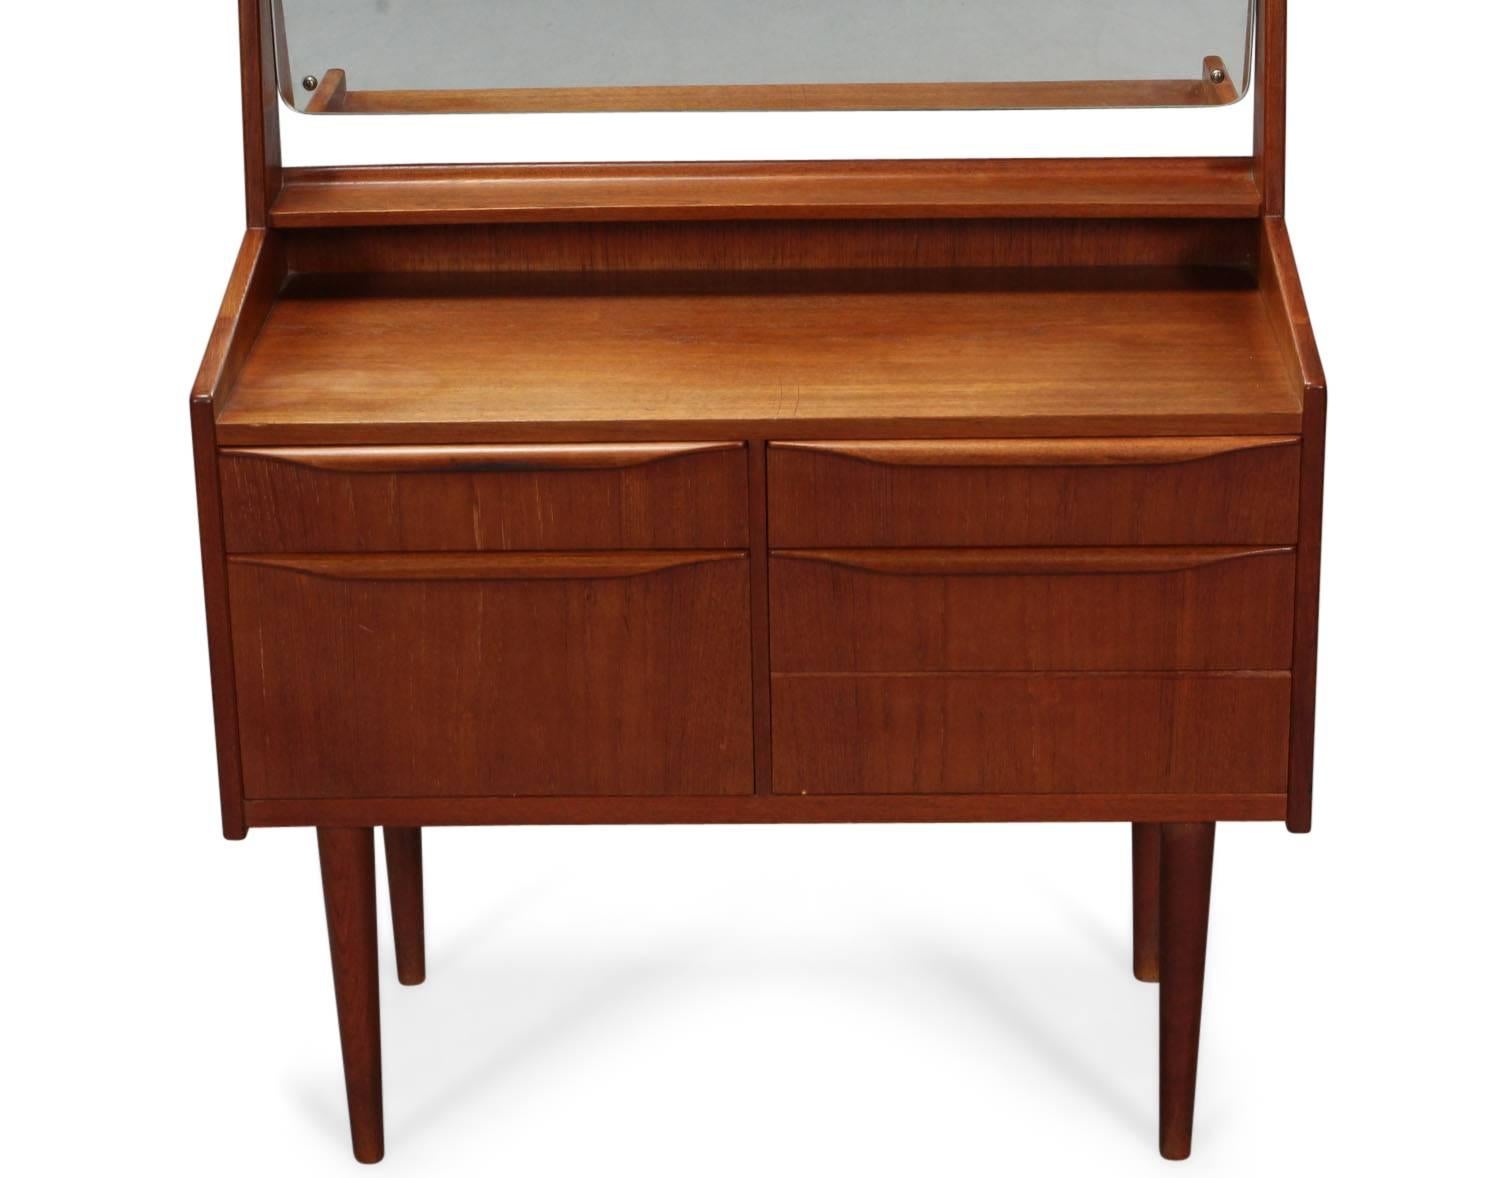 Finished teak wood dressing table, five drawers, round tapered legs, 1960. Danish furniture manufacturer.

Measures: H. 62-115, B. 80, D. 38 cm.

Traces of wear, a missing handle.